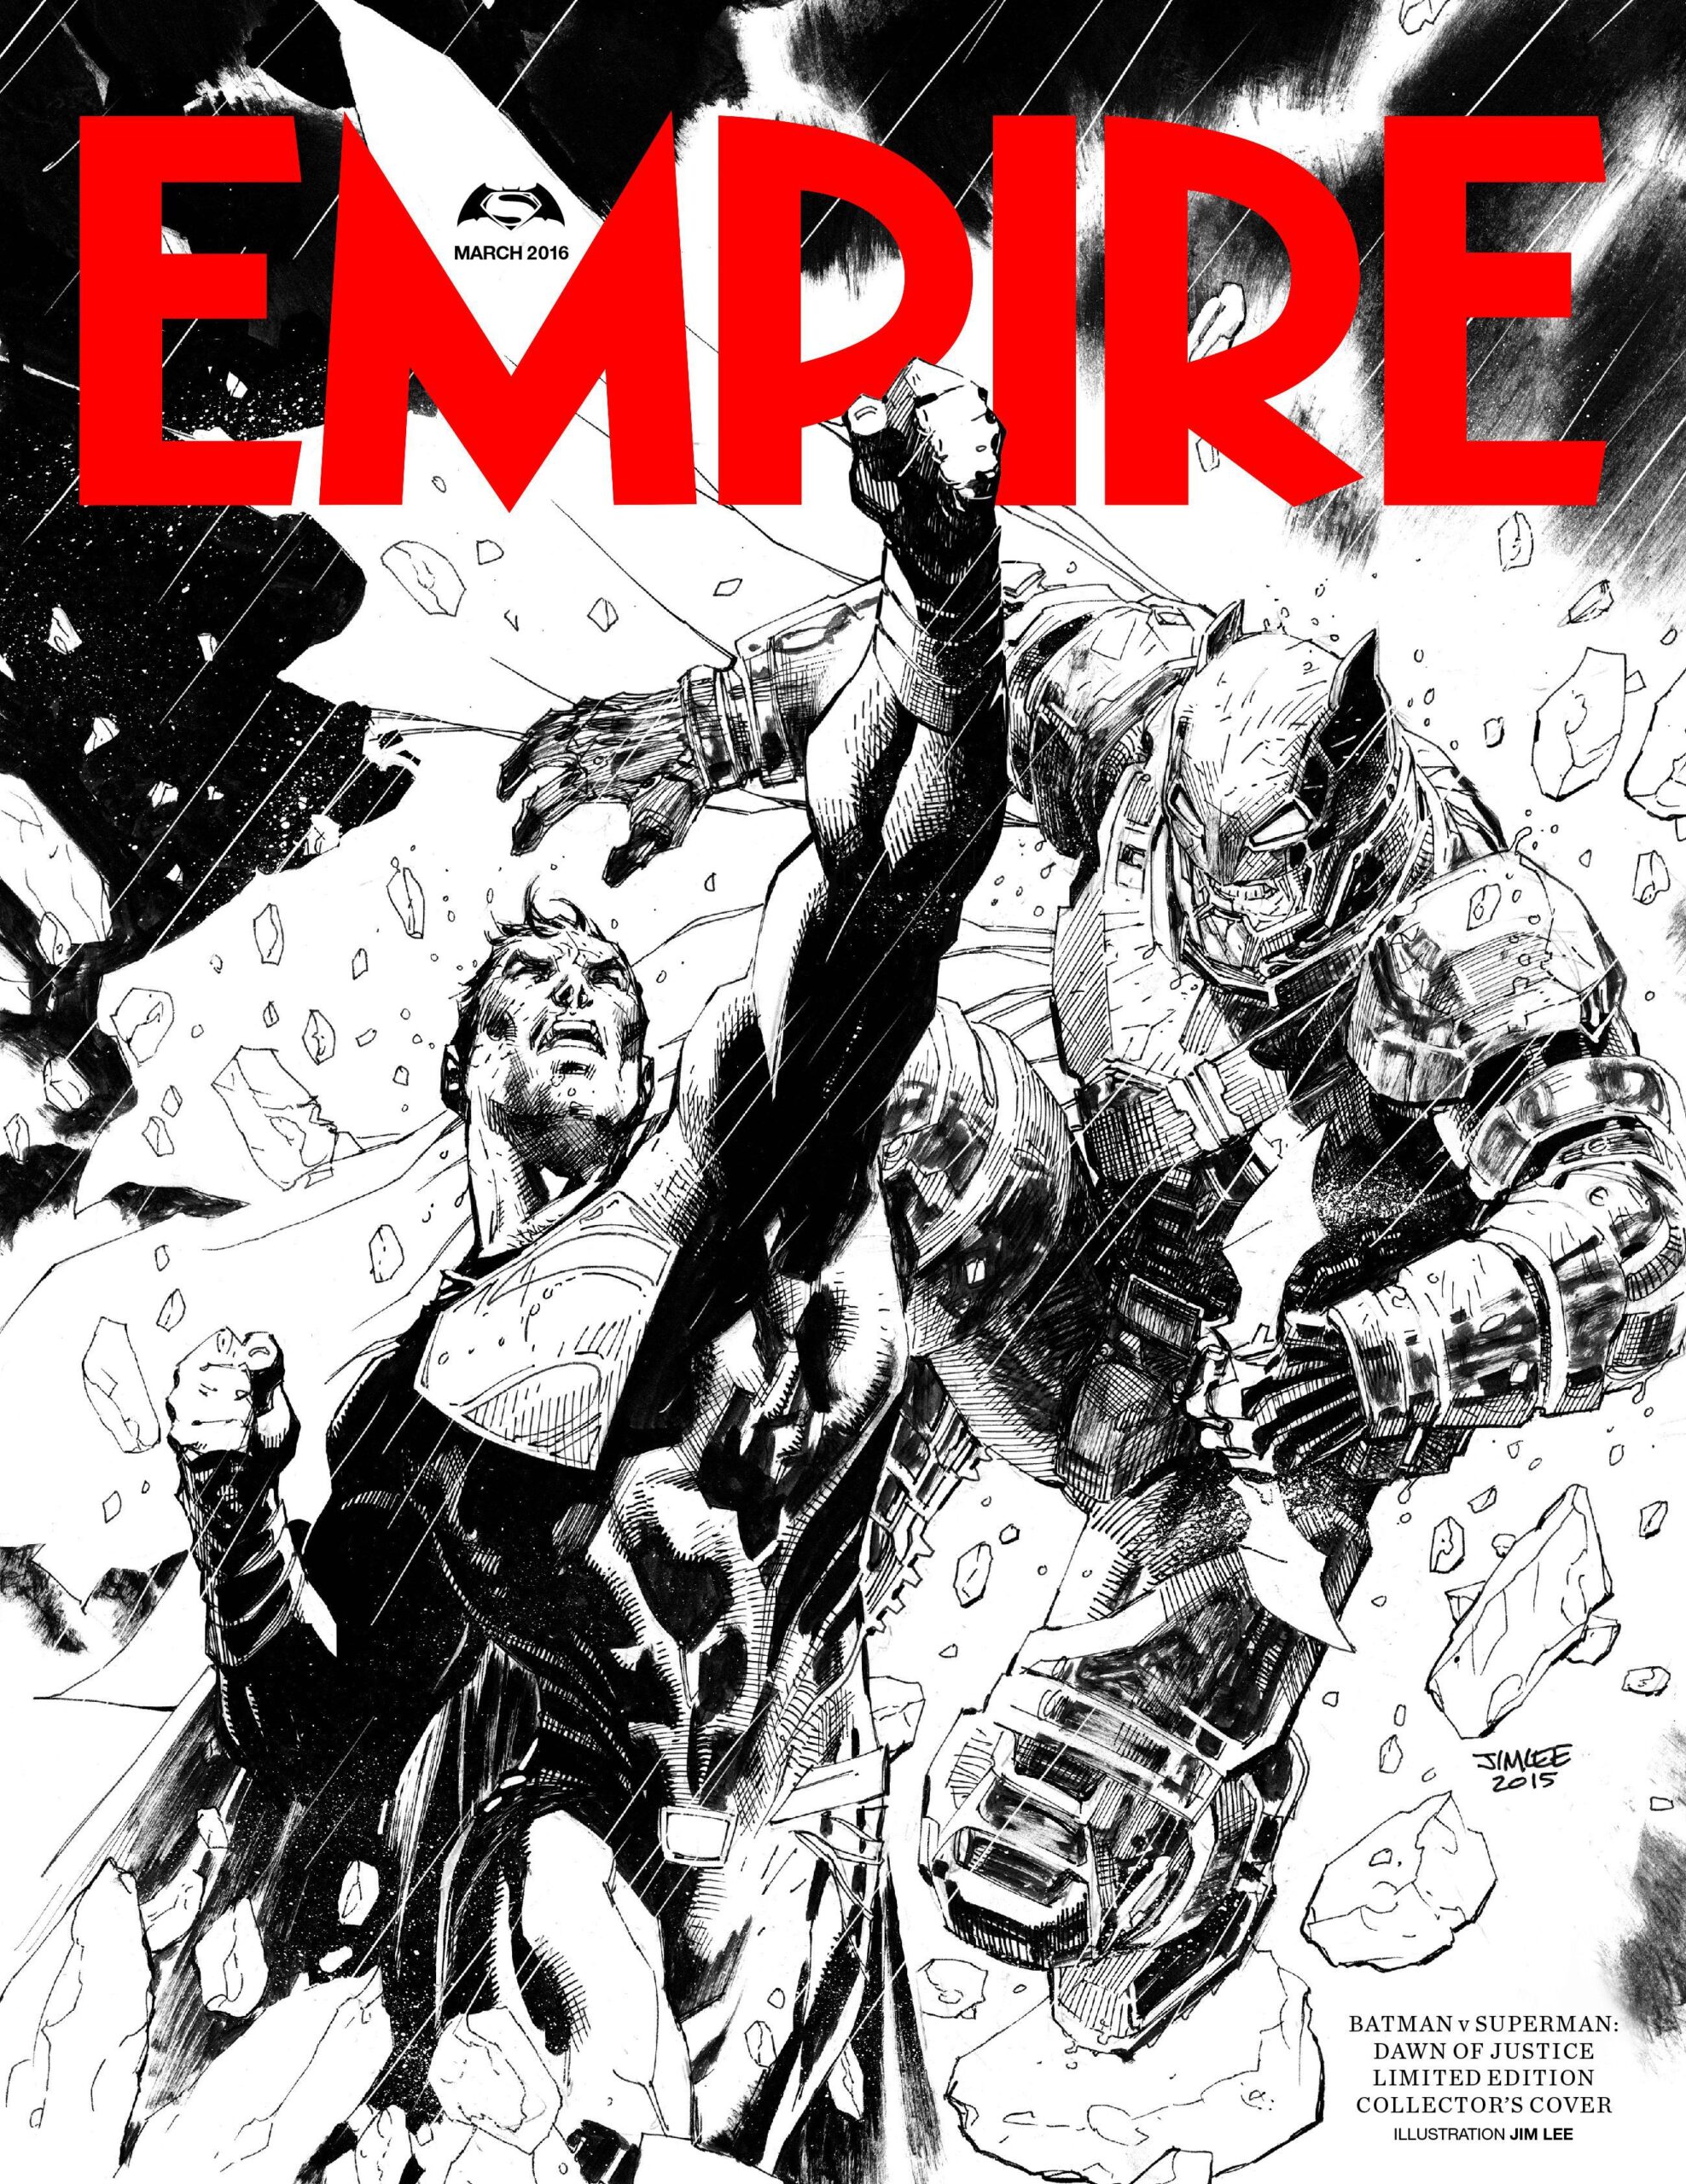 Jim Lee sketch cover for March 2016 issue of Empire Magazine